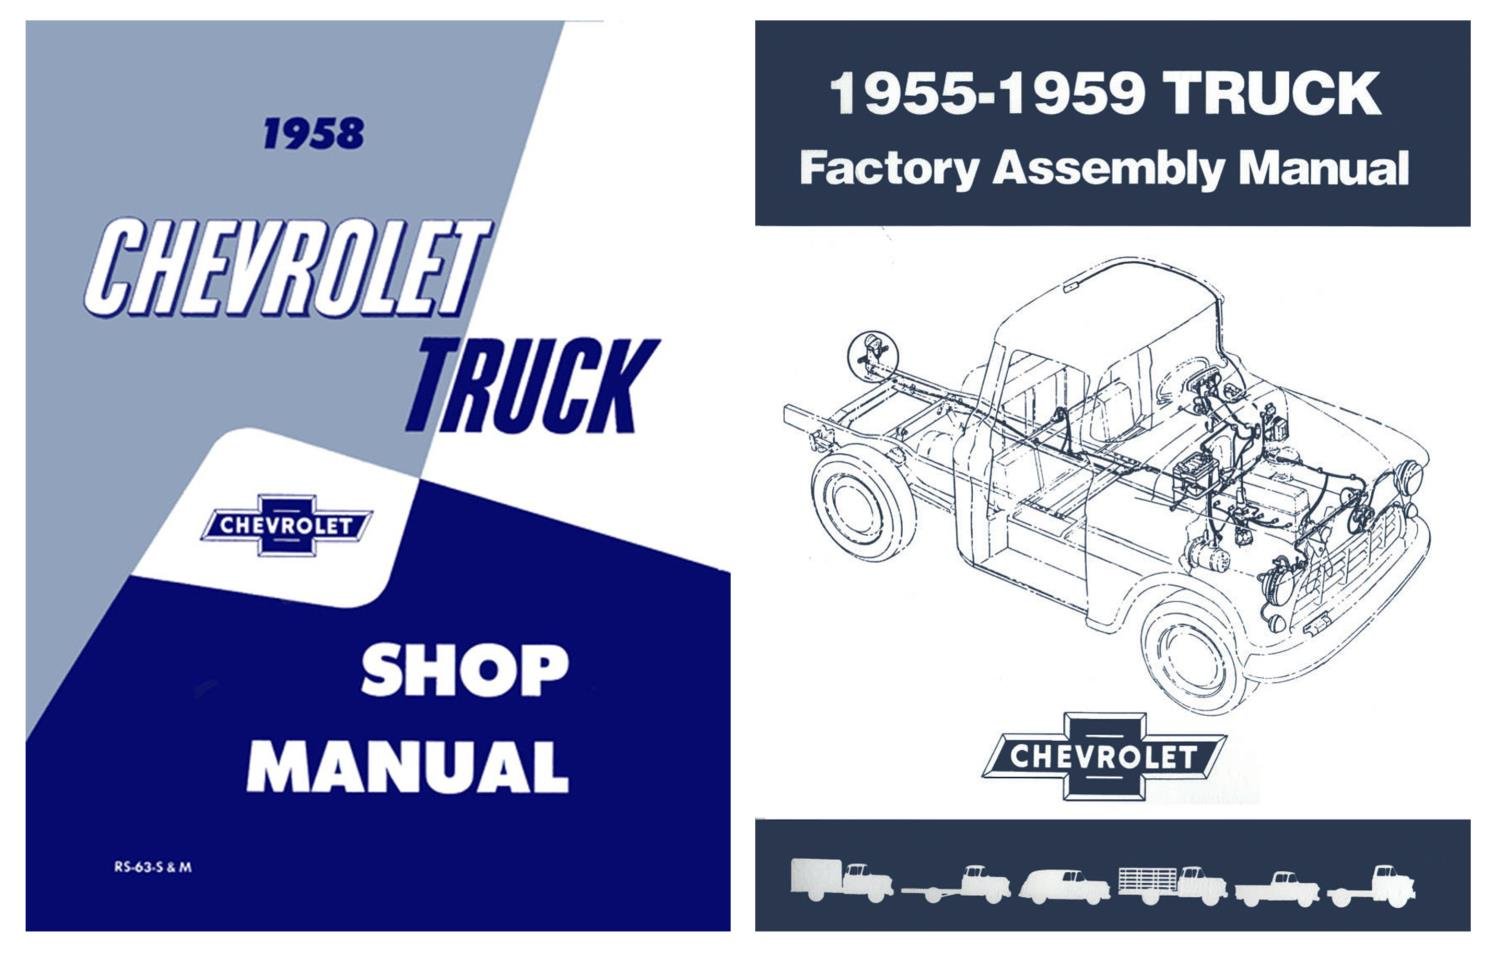 Shop and Assembly Manual Set for 1958 Chevrolet